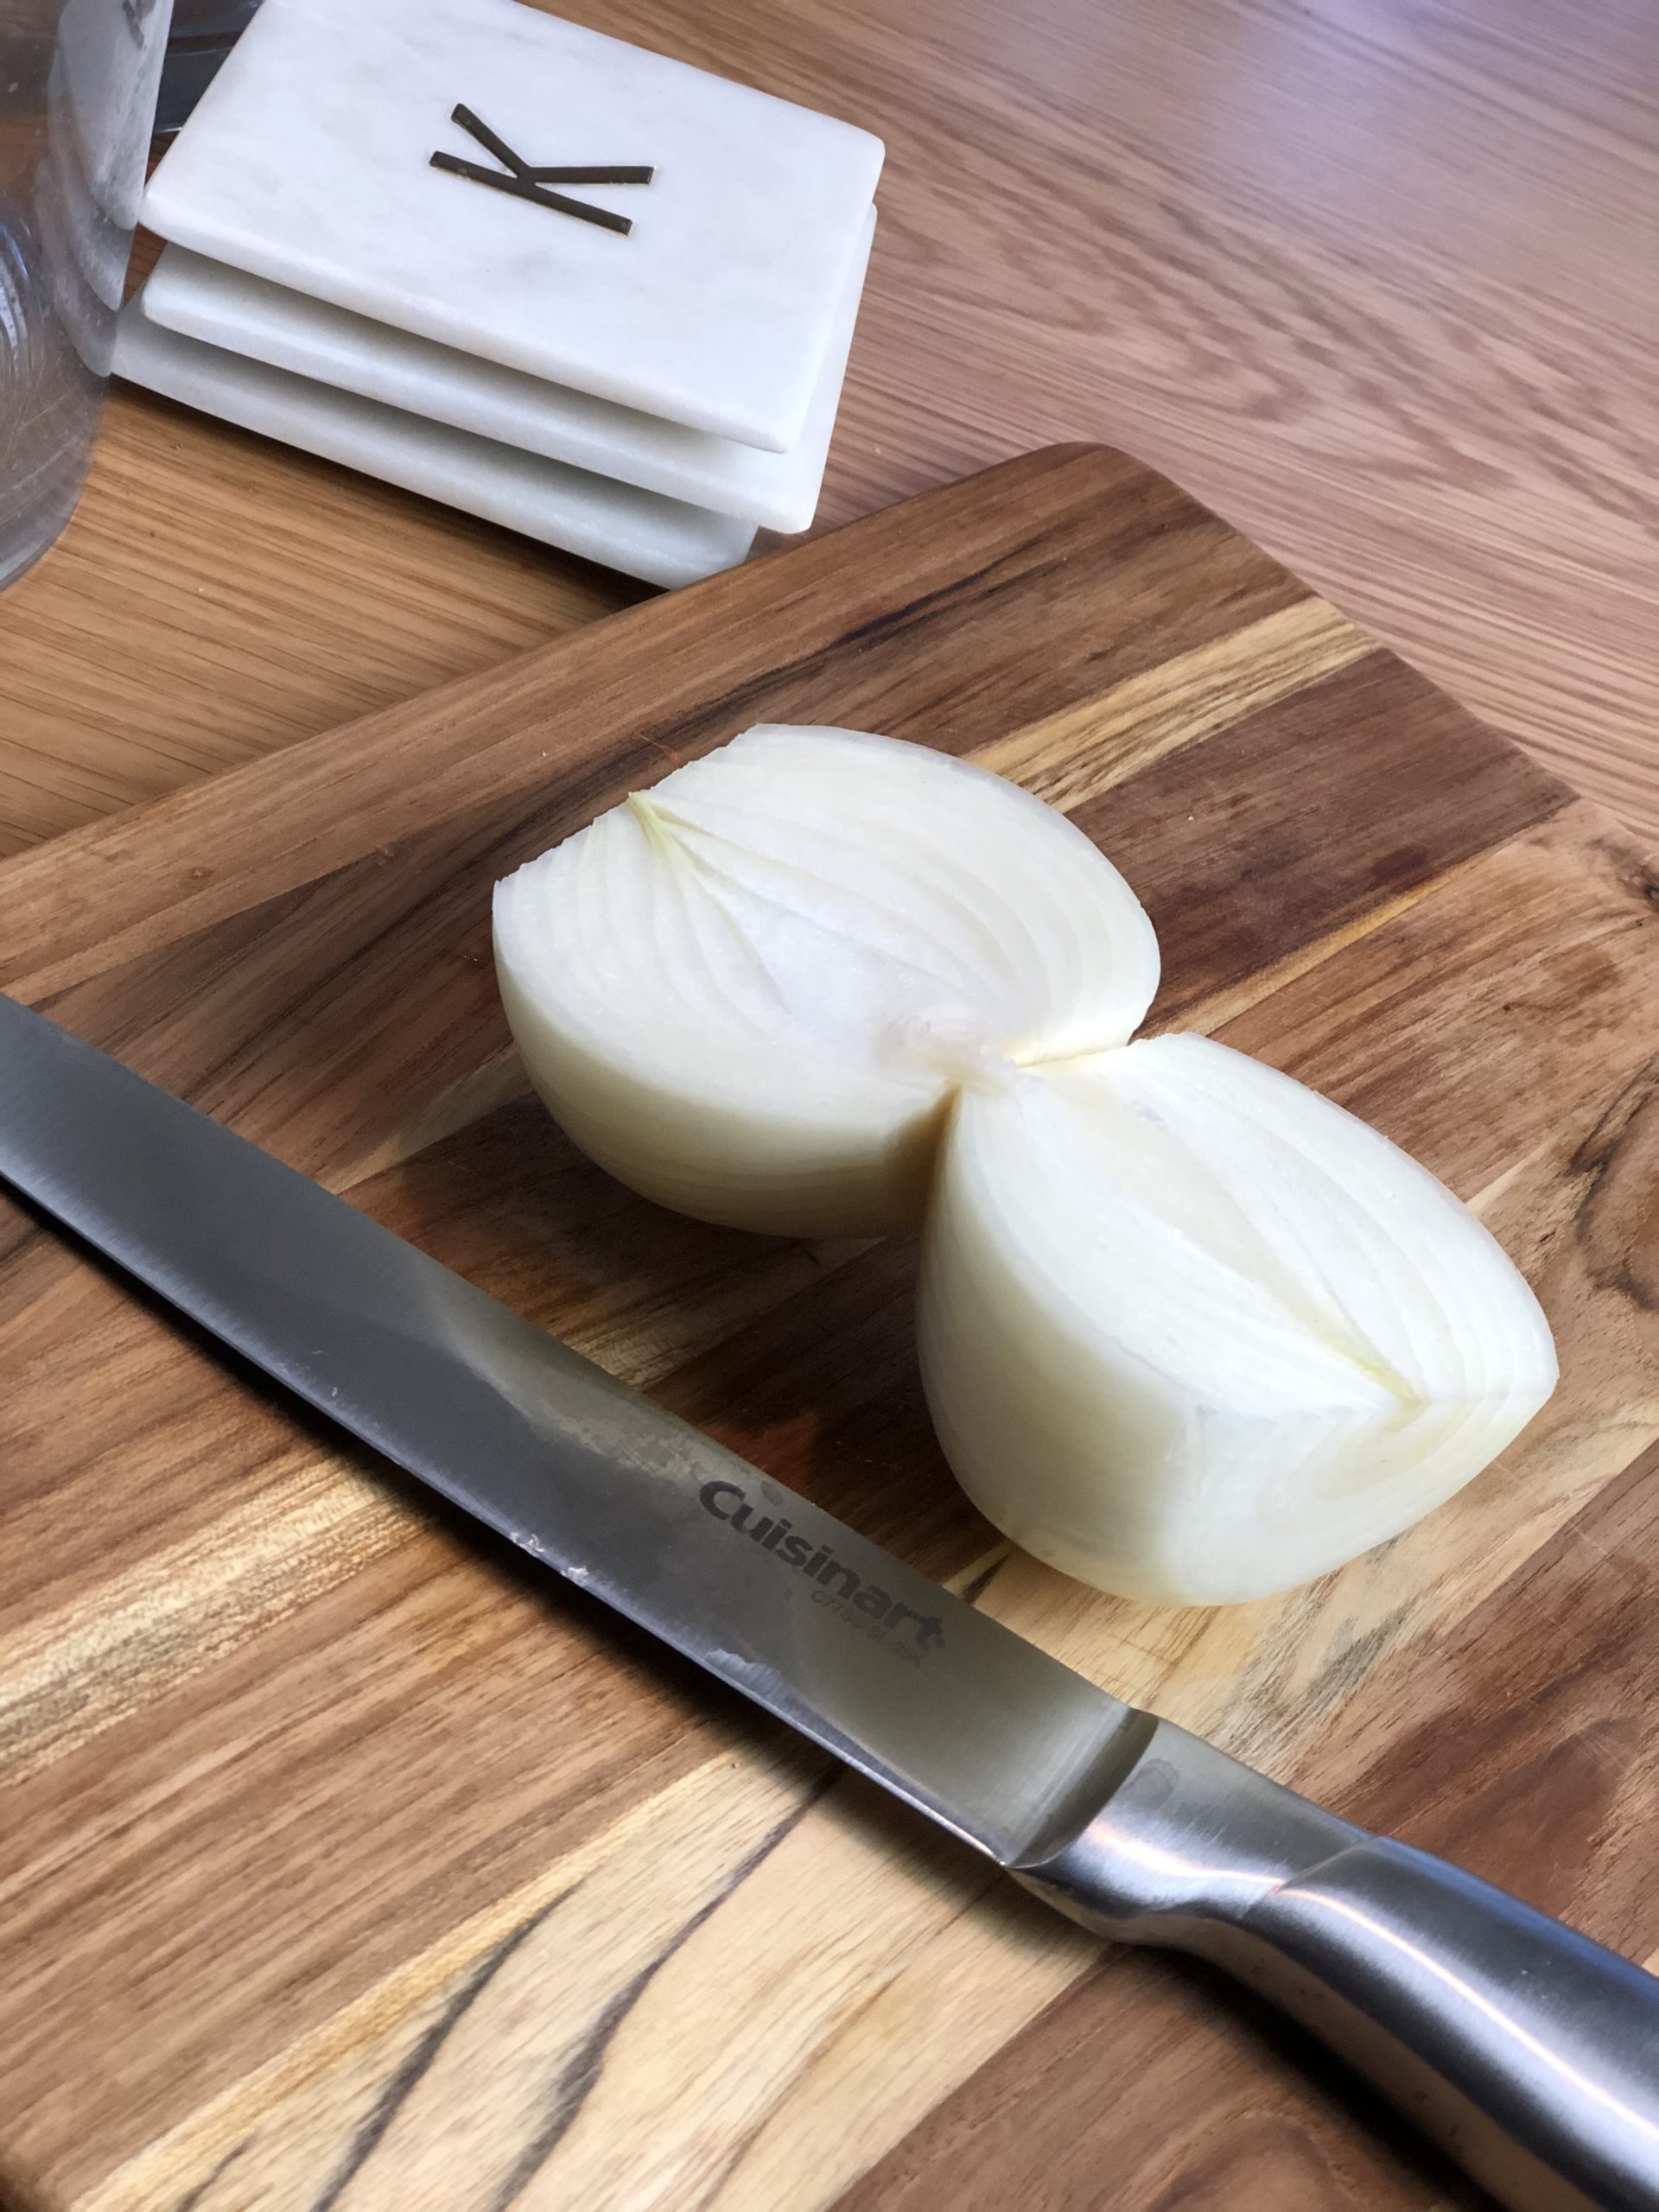 IMG_8474-768x1024 How To Properly Cut An Onion - Three Ways To Cut An Onion